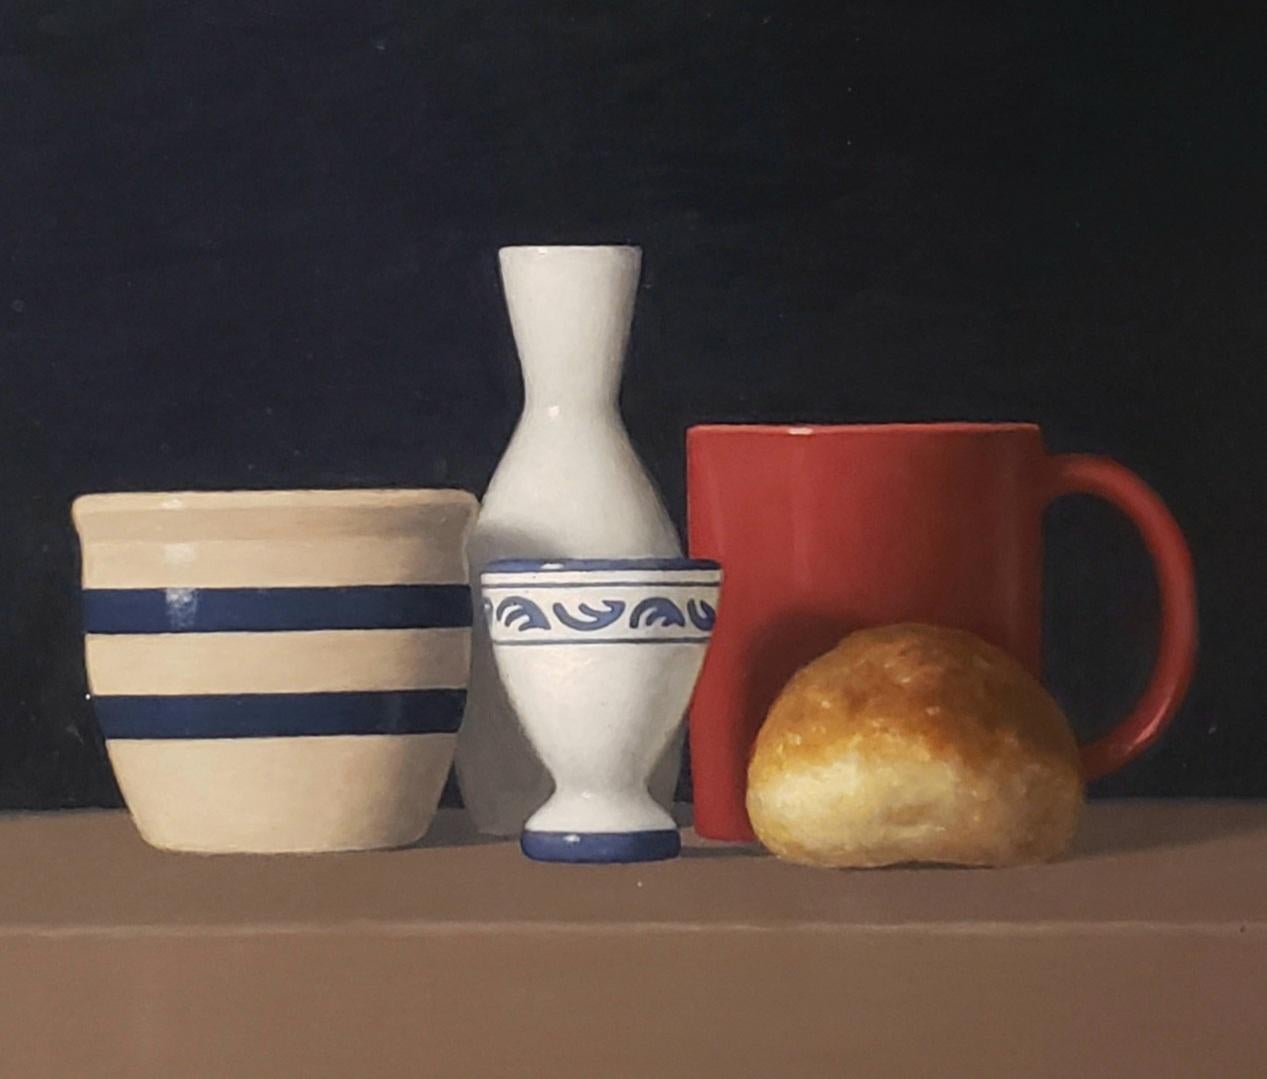 FREE SHIPPING
David Harrison, is a master in the style of Realism painting. Roll with Four Objects shows the simple beauty of Realism paintings. Gallery Wrapped so no need for a frame.
Harrison, a painter from the Boston area focuses on the